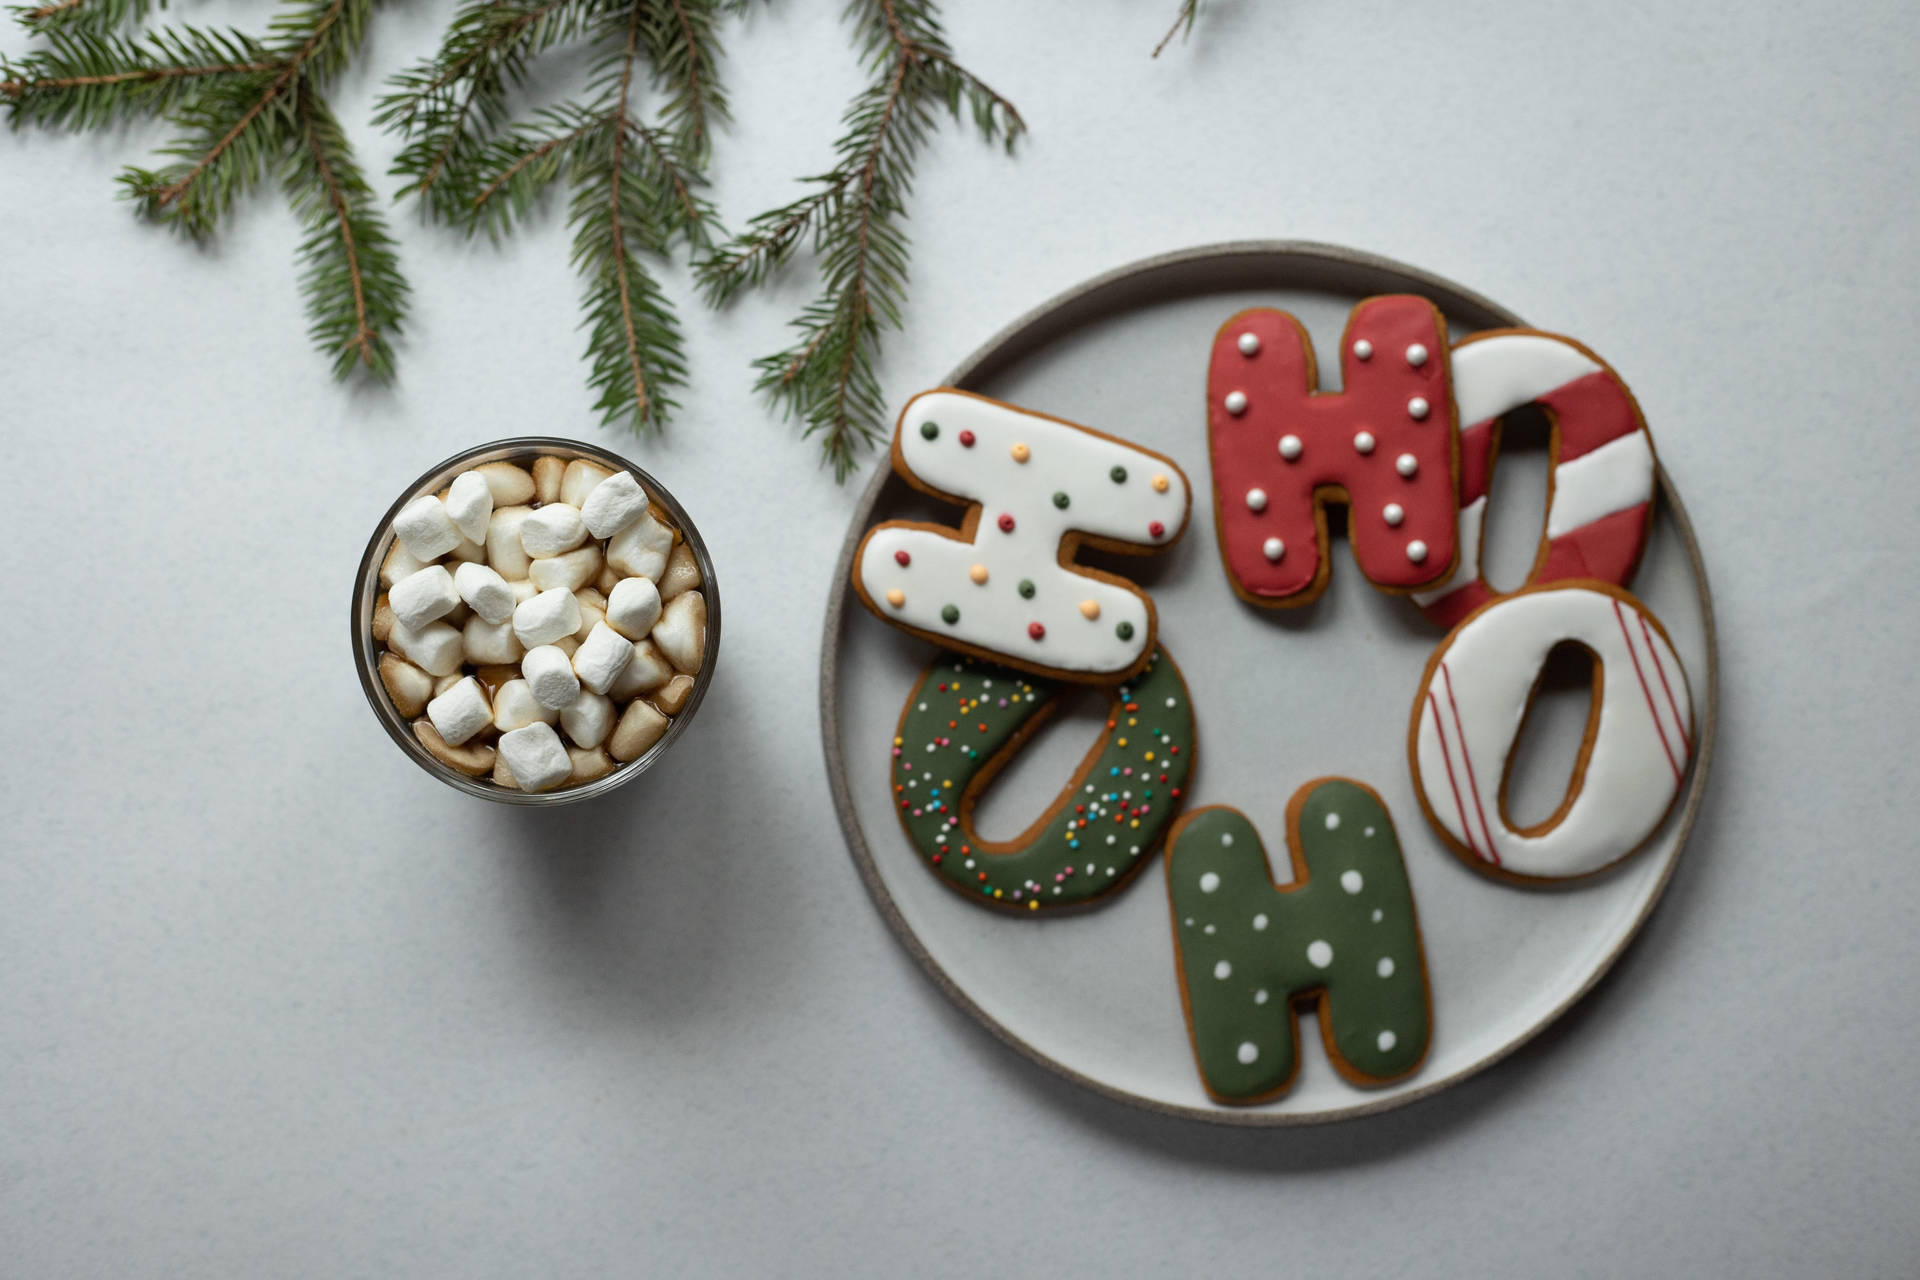 Delectable Christmas Cookies Decorated With Chocolate